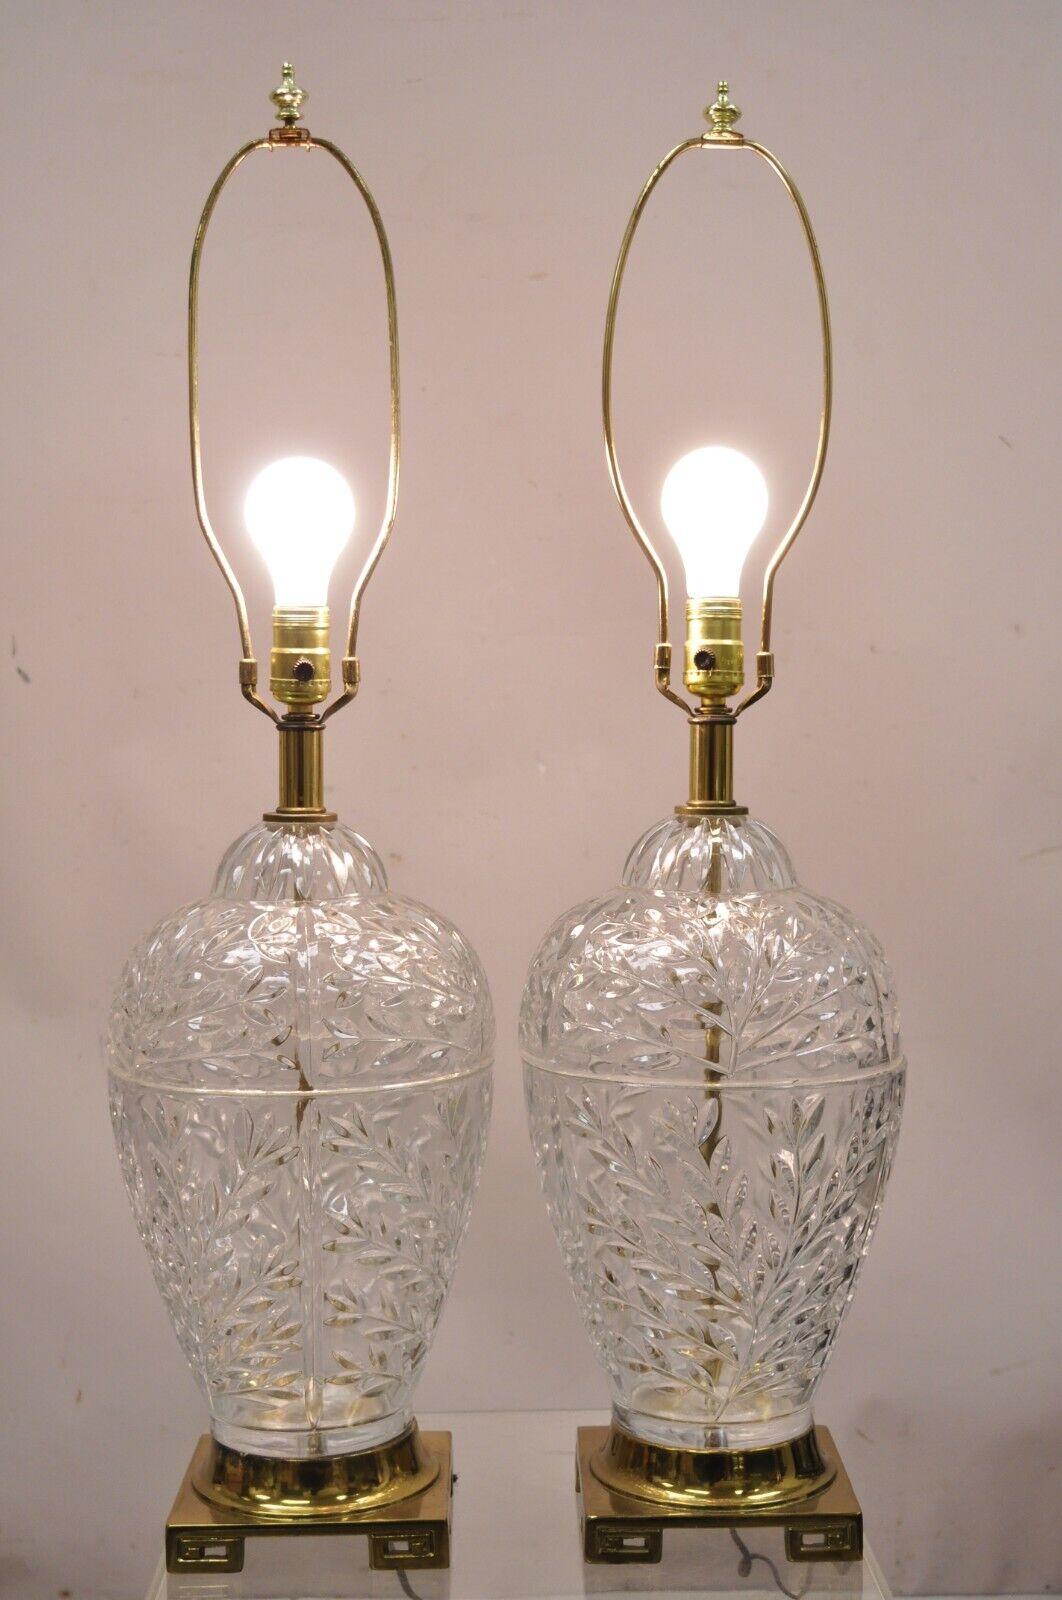 Pair Vintage French style cut crystal glass bulbous table lamps brass Greek key base. Item features a leafy design bulbous crystal body, brass finish greek key base, very nice vintage pair, quality craftsmanship, great style form. Circa Mid to Late